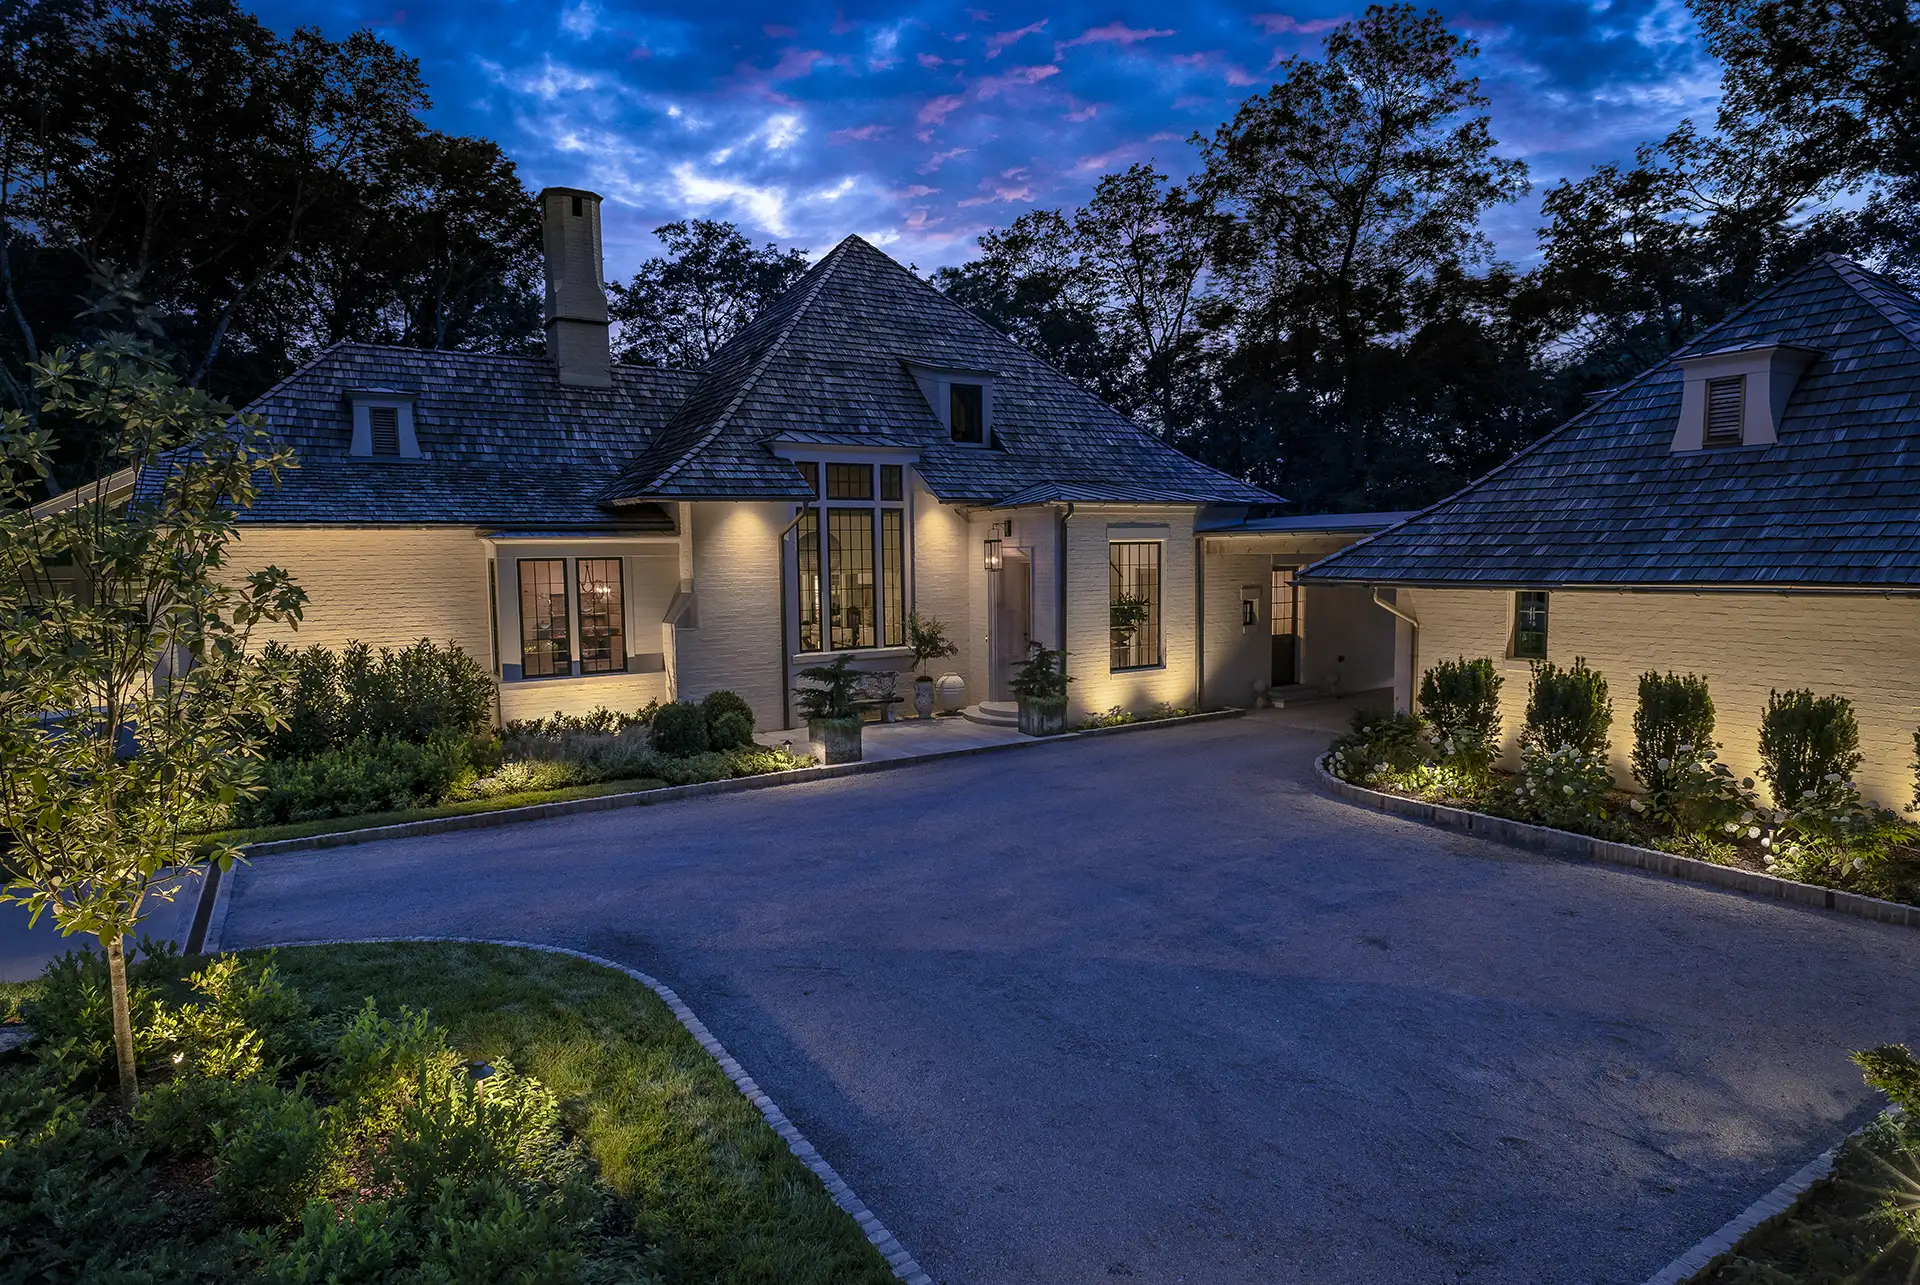 Rains residence image 2 driveway entrance Lighthouse Outdoor Lighting and Audio Nashville, TN